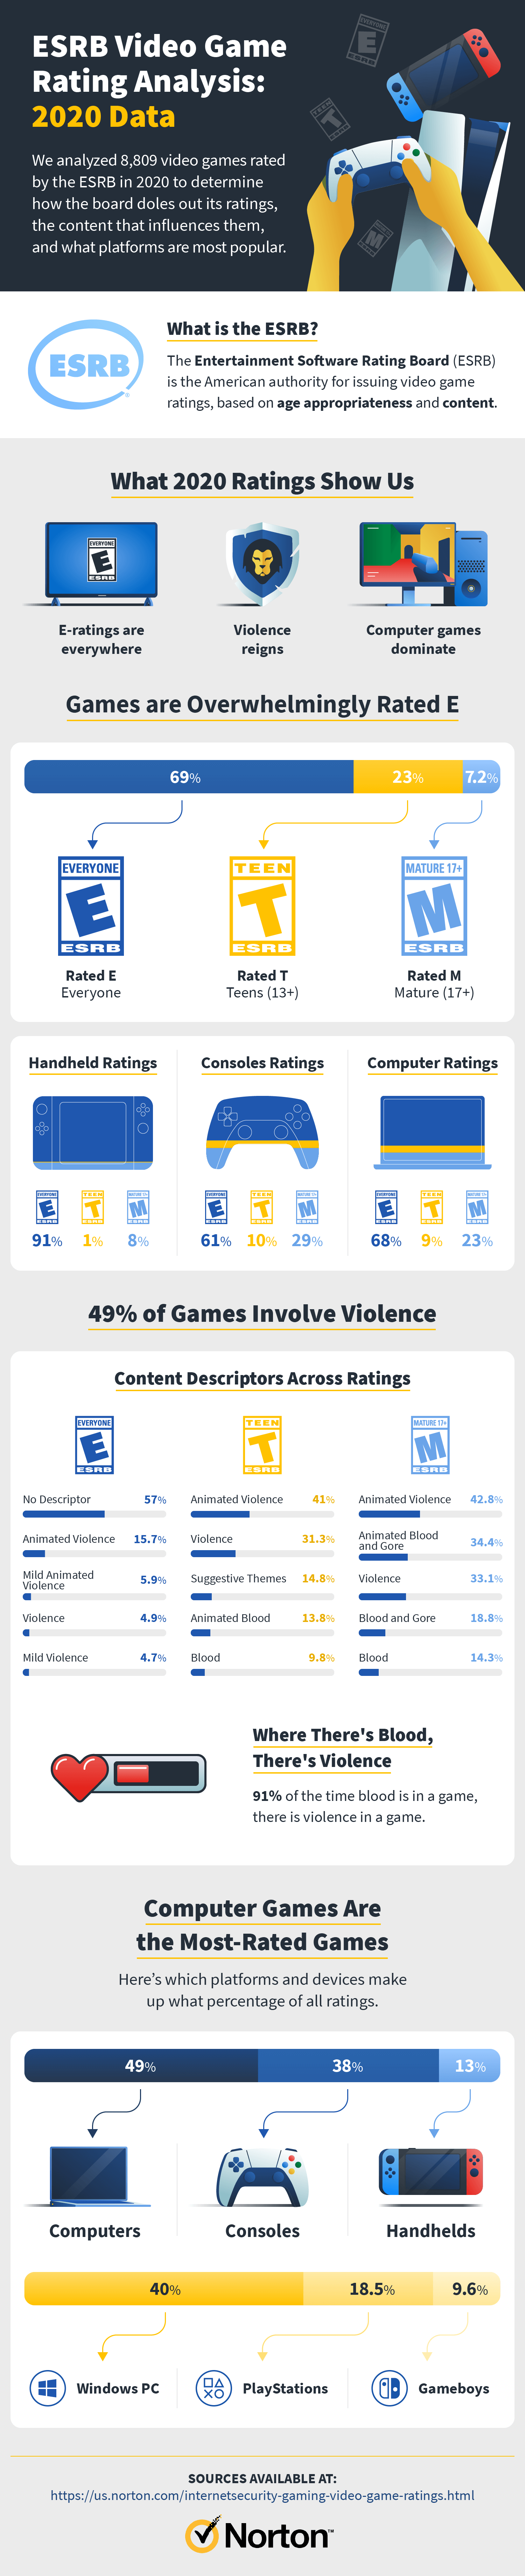 what impact does the rating system have on popularity of a particular video game?